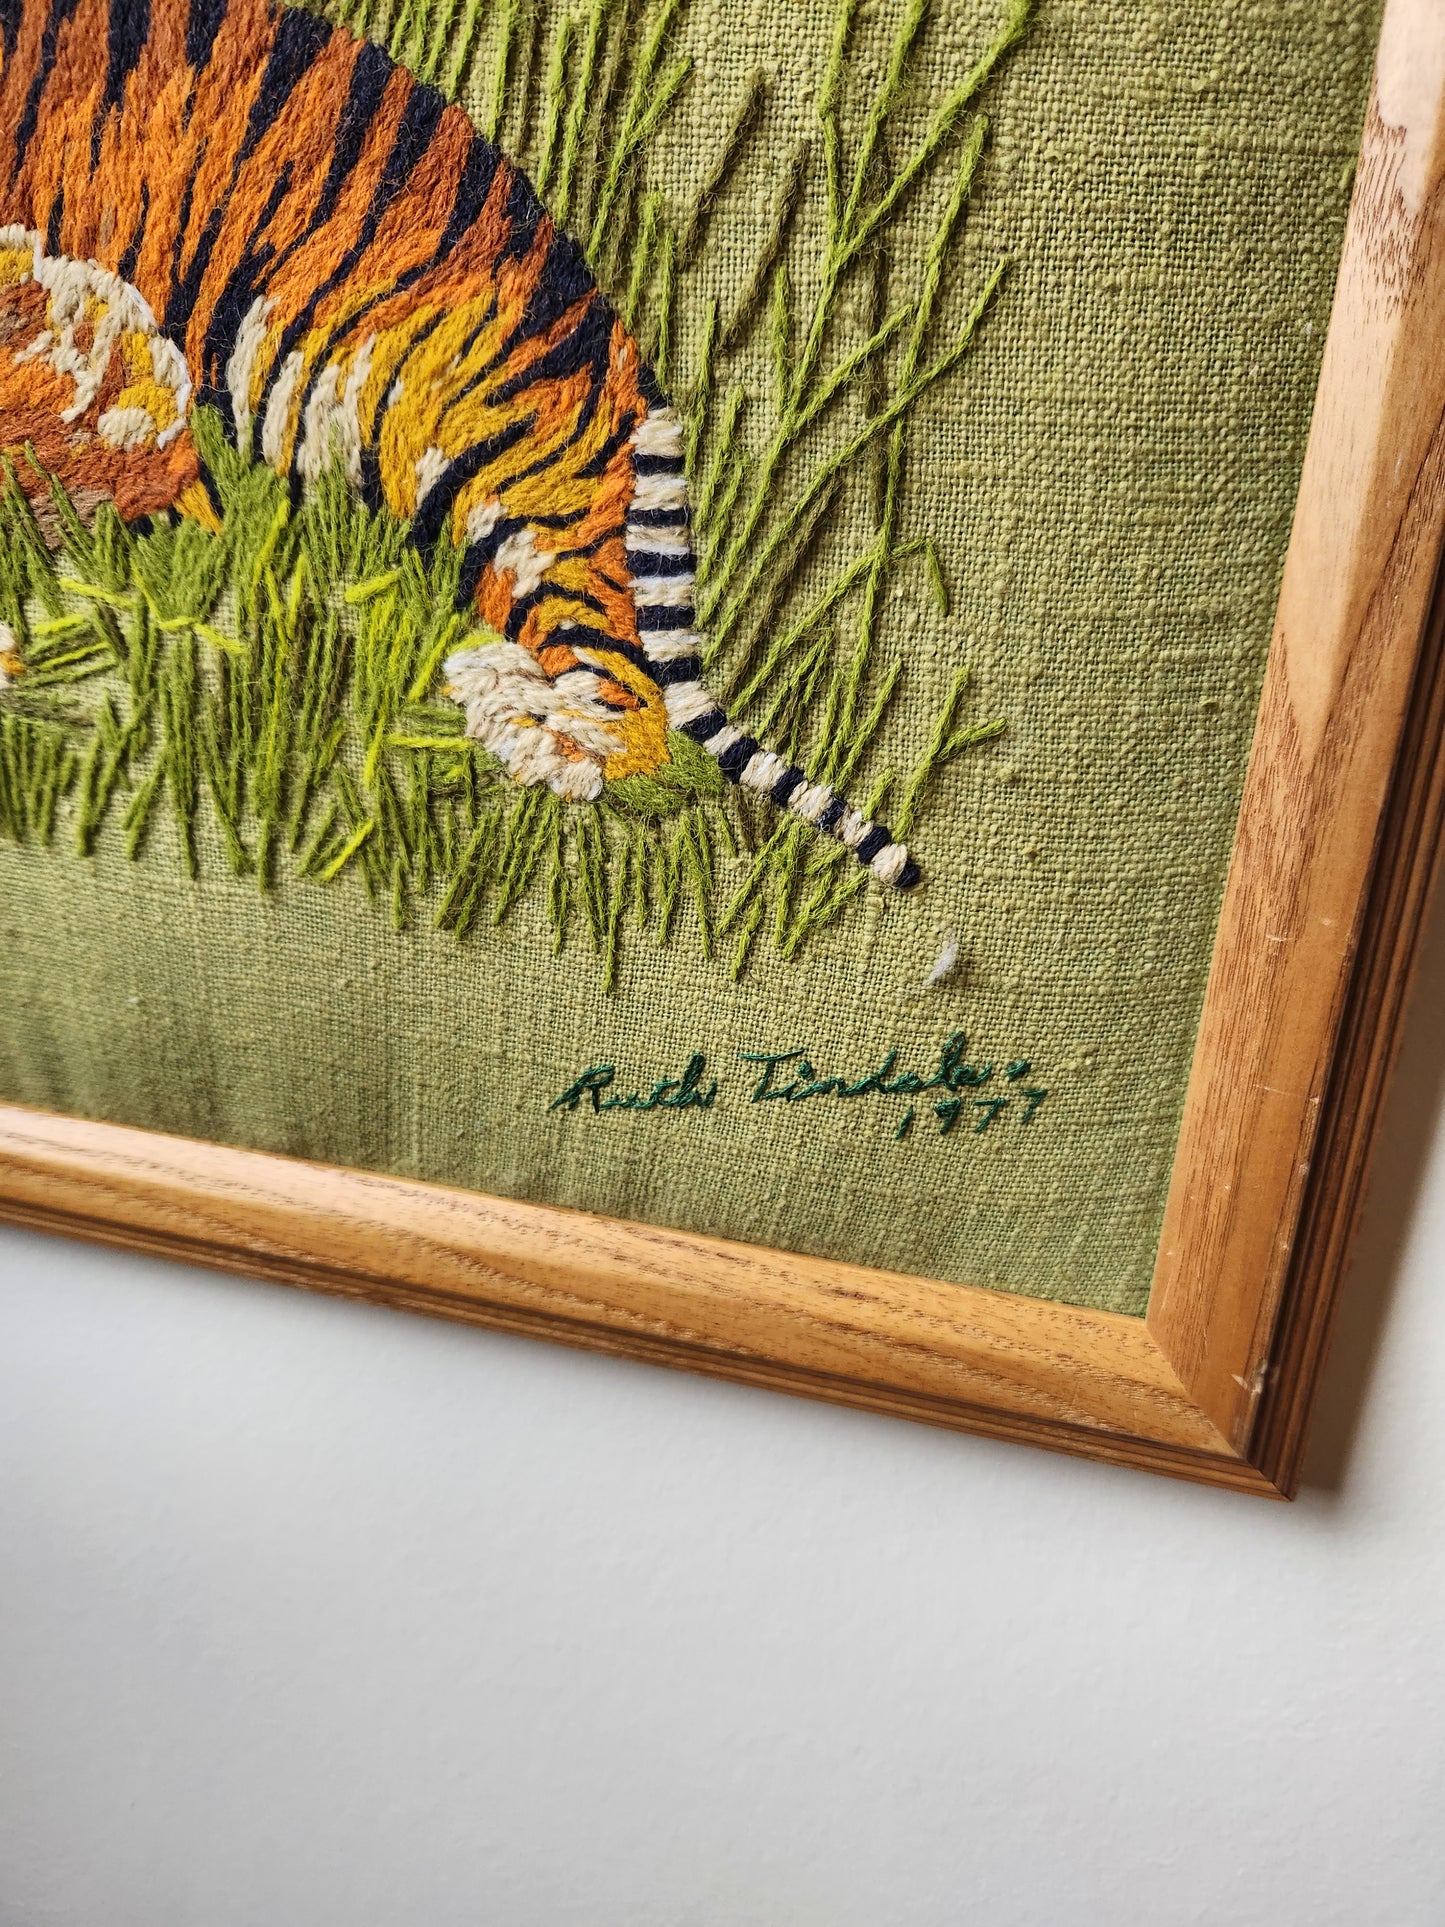 Tiger Embroidery Art